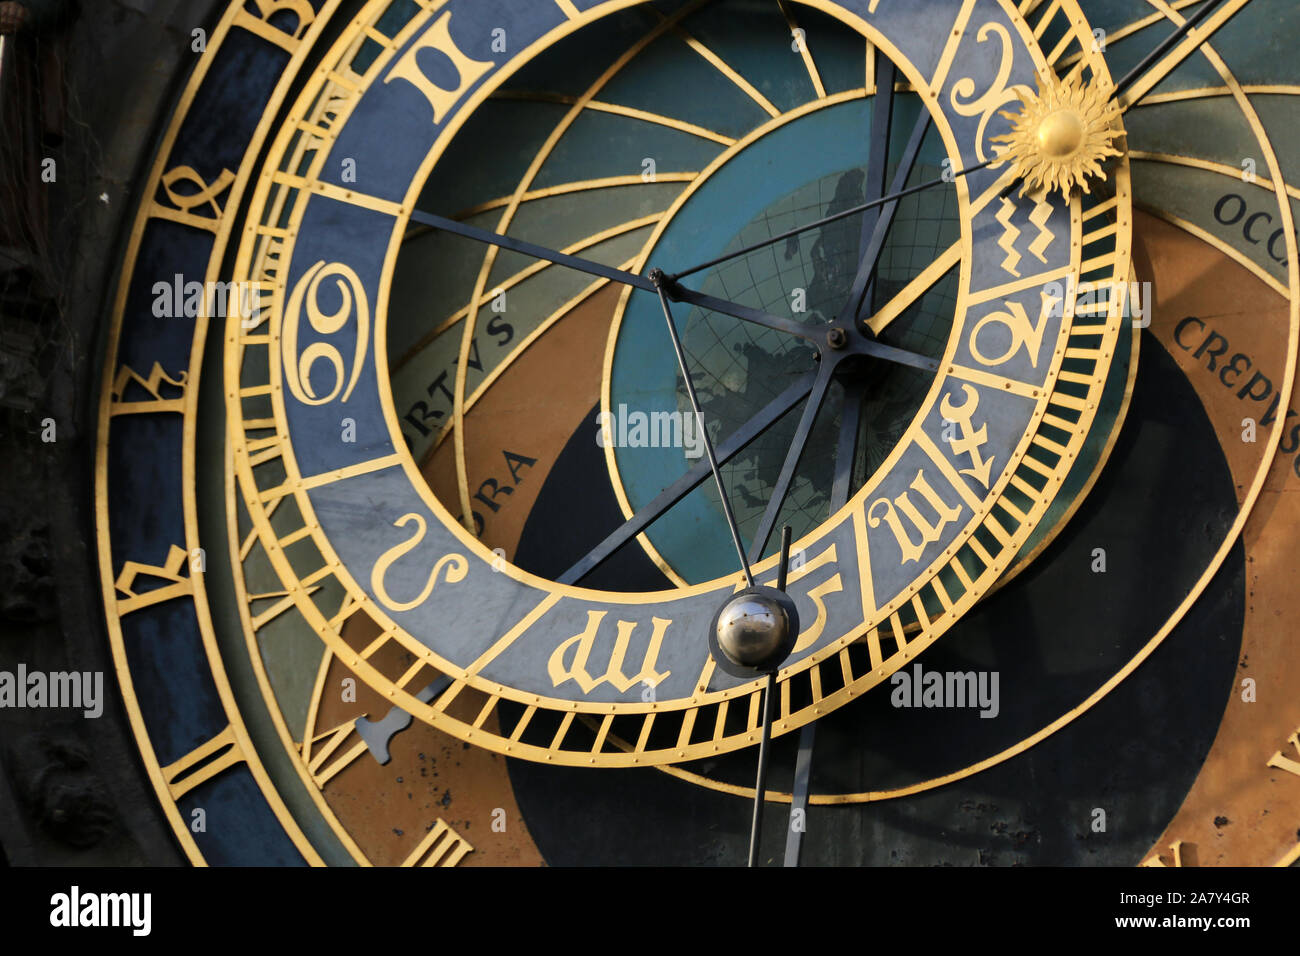 Close-up view of a mechanical masterpiece of the medieval times: The Prague Astronomical Clock at the old town square in Prague, Czech Republic Stock Photo